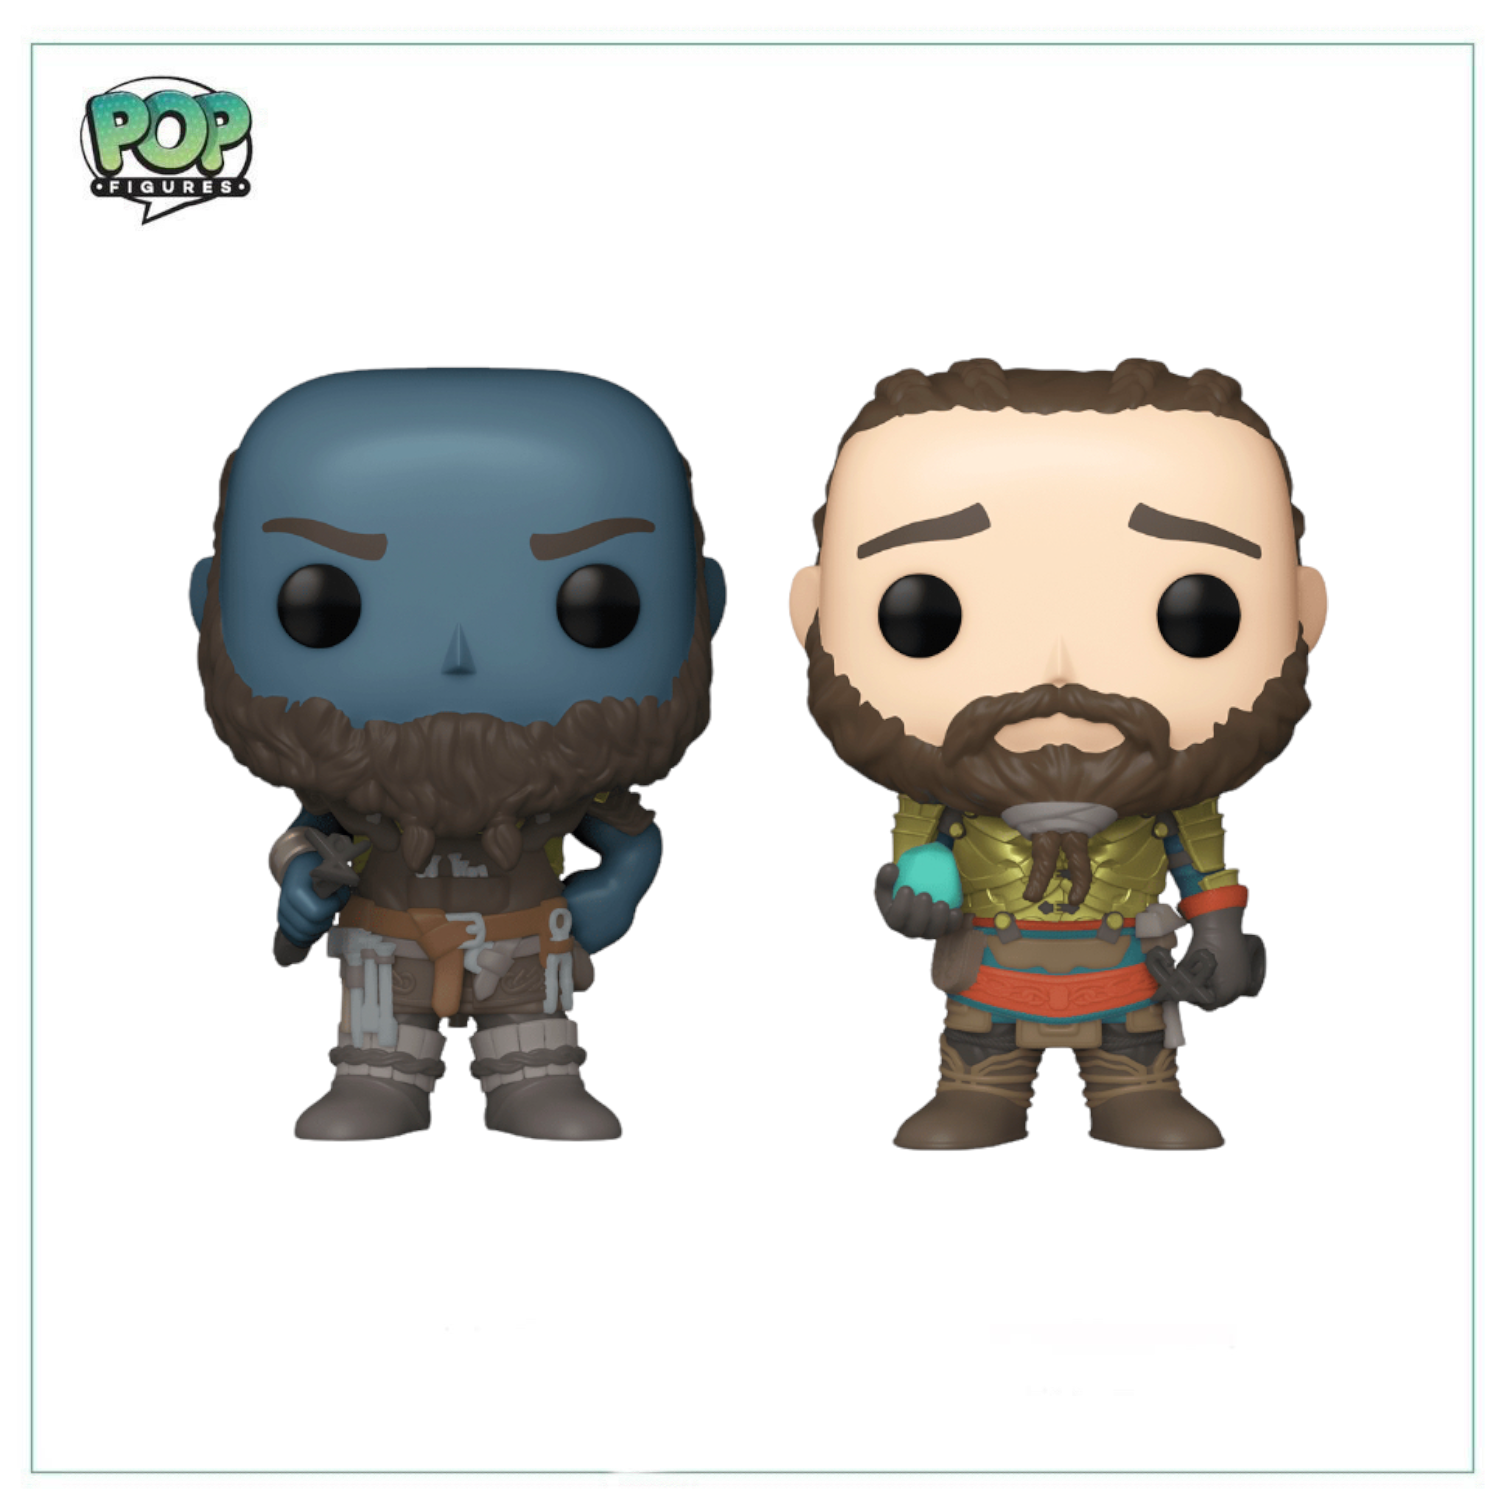 Brok & Sindri Deluxe Funko 2 Pack! Games -  Special Edition / PlayStation Licensed Productl